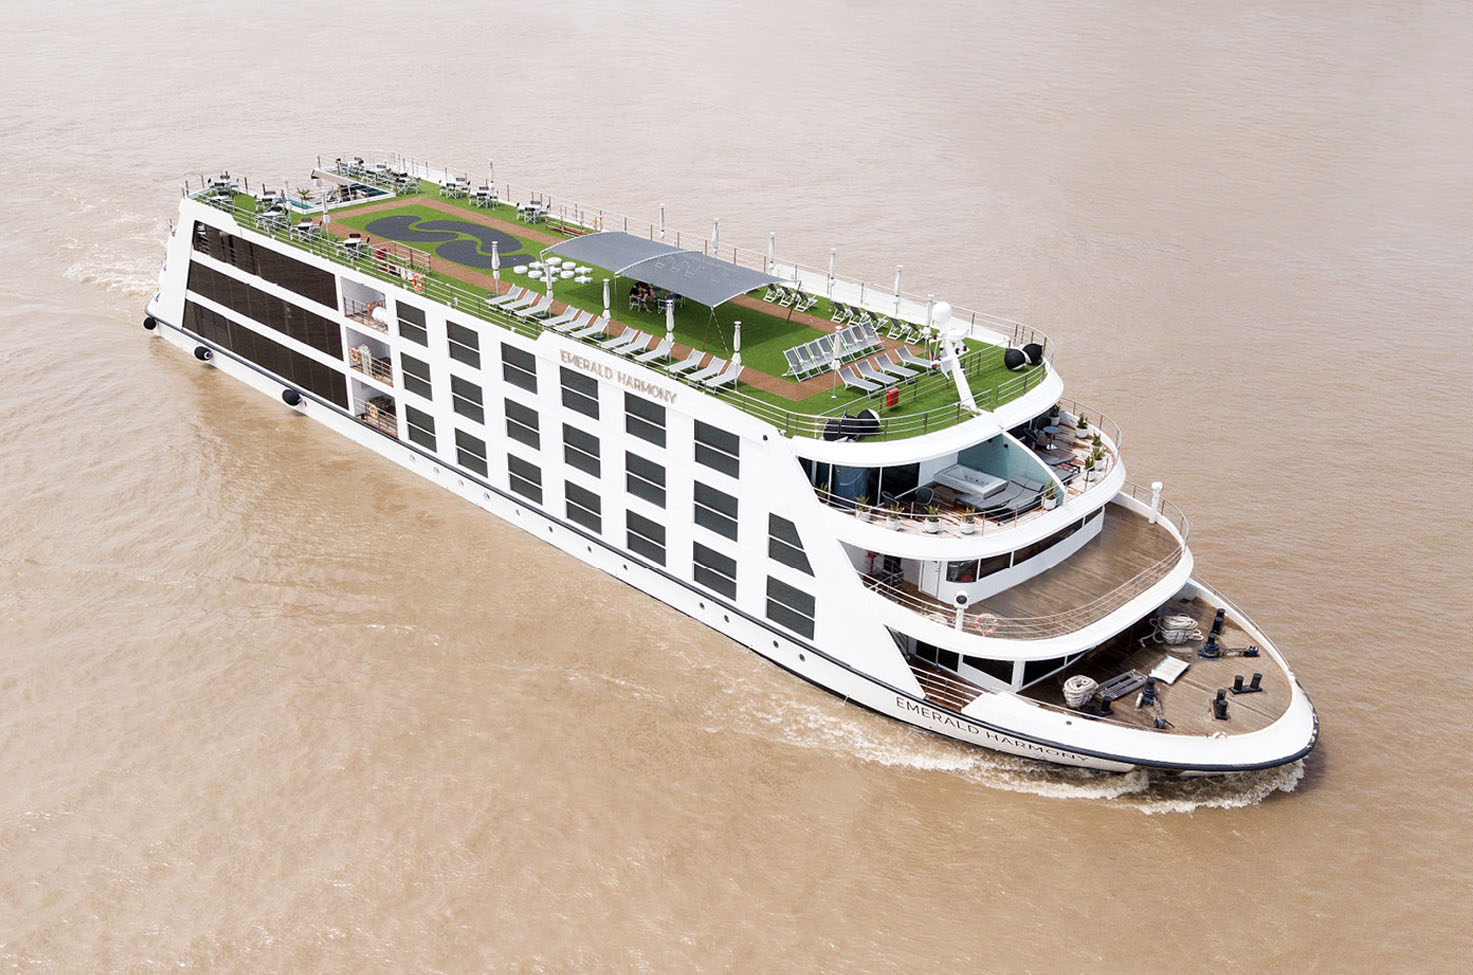 Emerald Harmony luxury cruise ship sailing the Mekong River, with bright blue sky and trees in the background